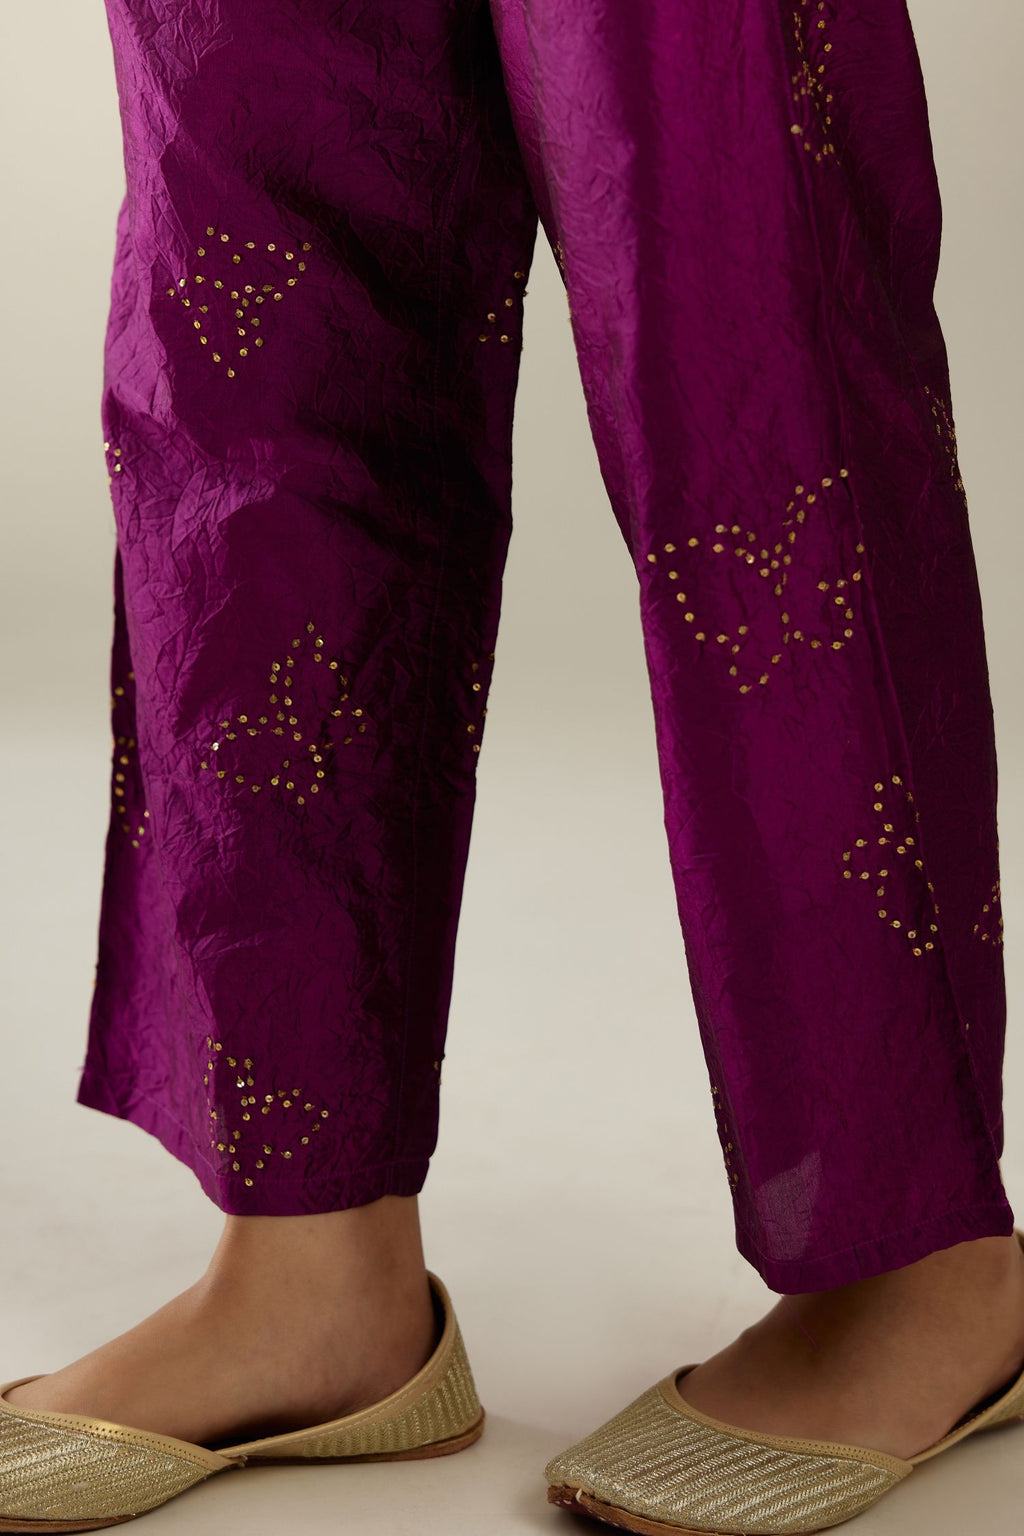 Sangria hand crushed silk pants with side pockets and assorted sequined butterflies till mid-calf length.